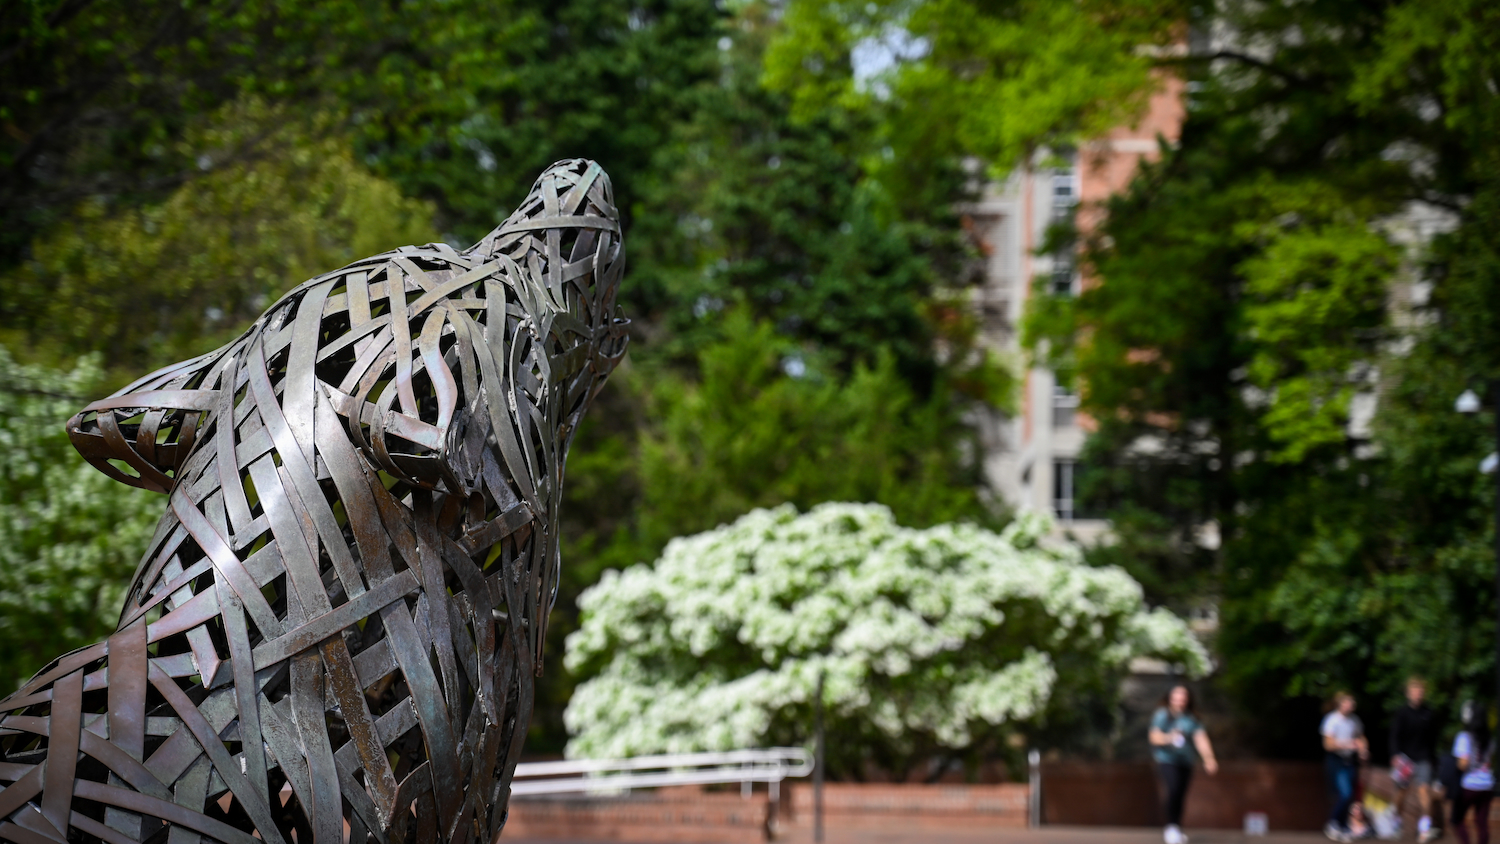 One of the copper wolves at Wolf Plaza looks out over students passing by during springtime.